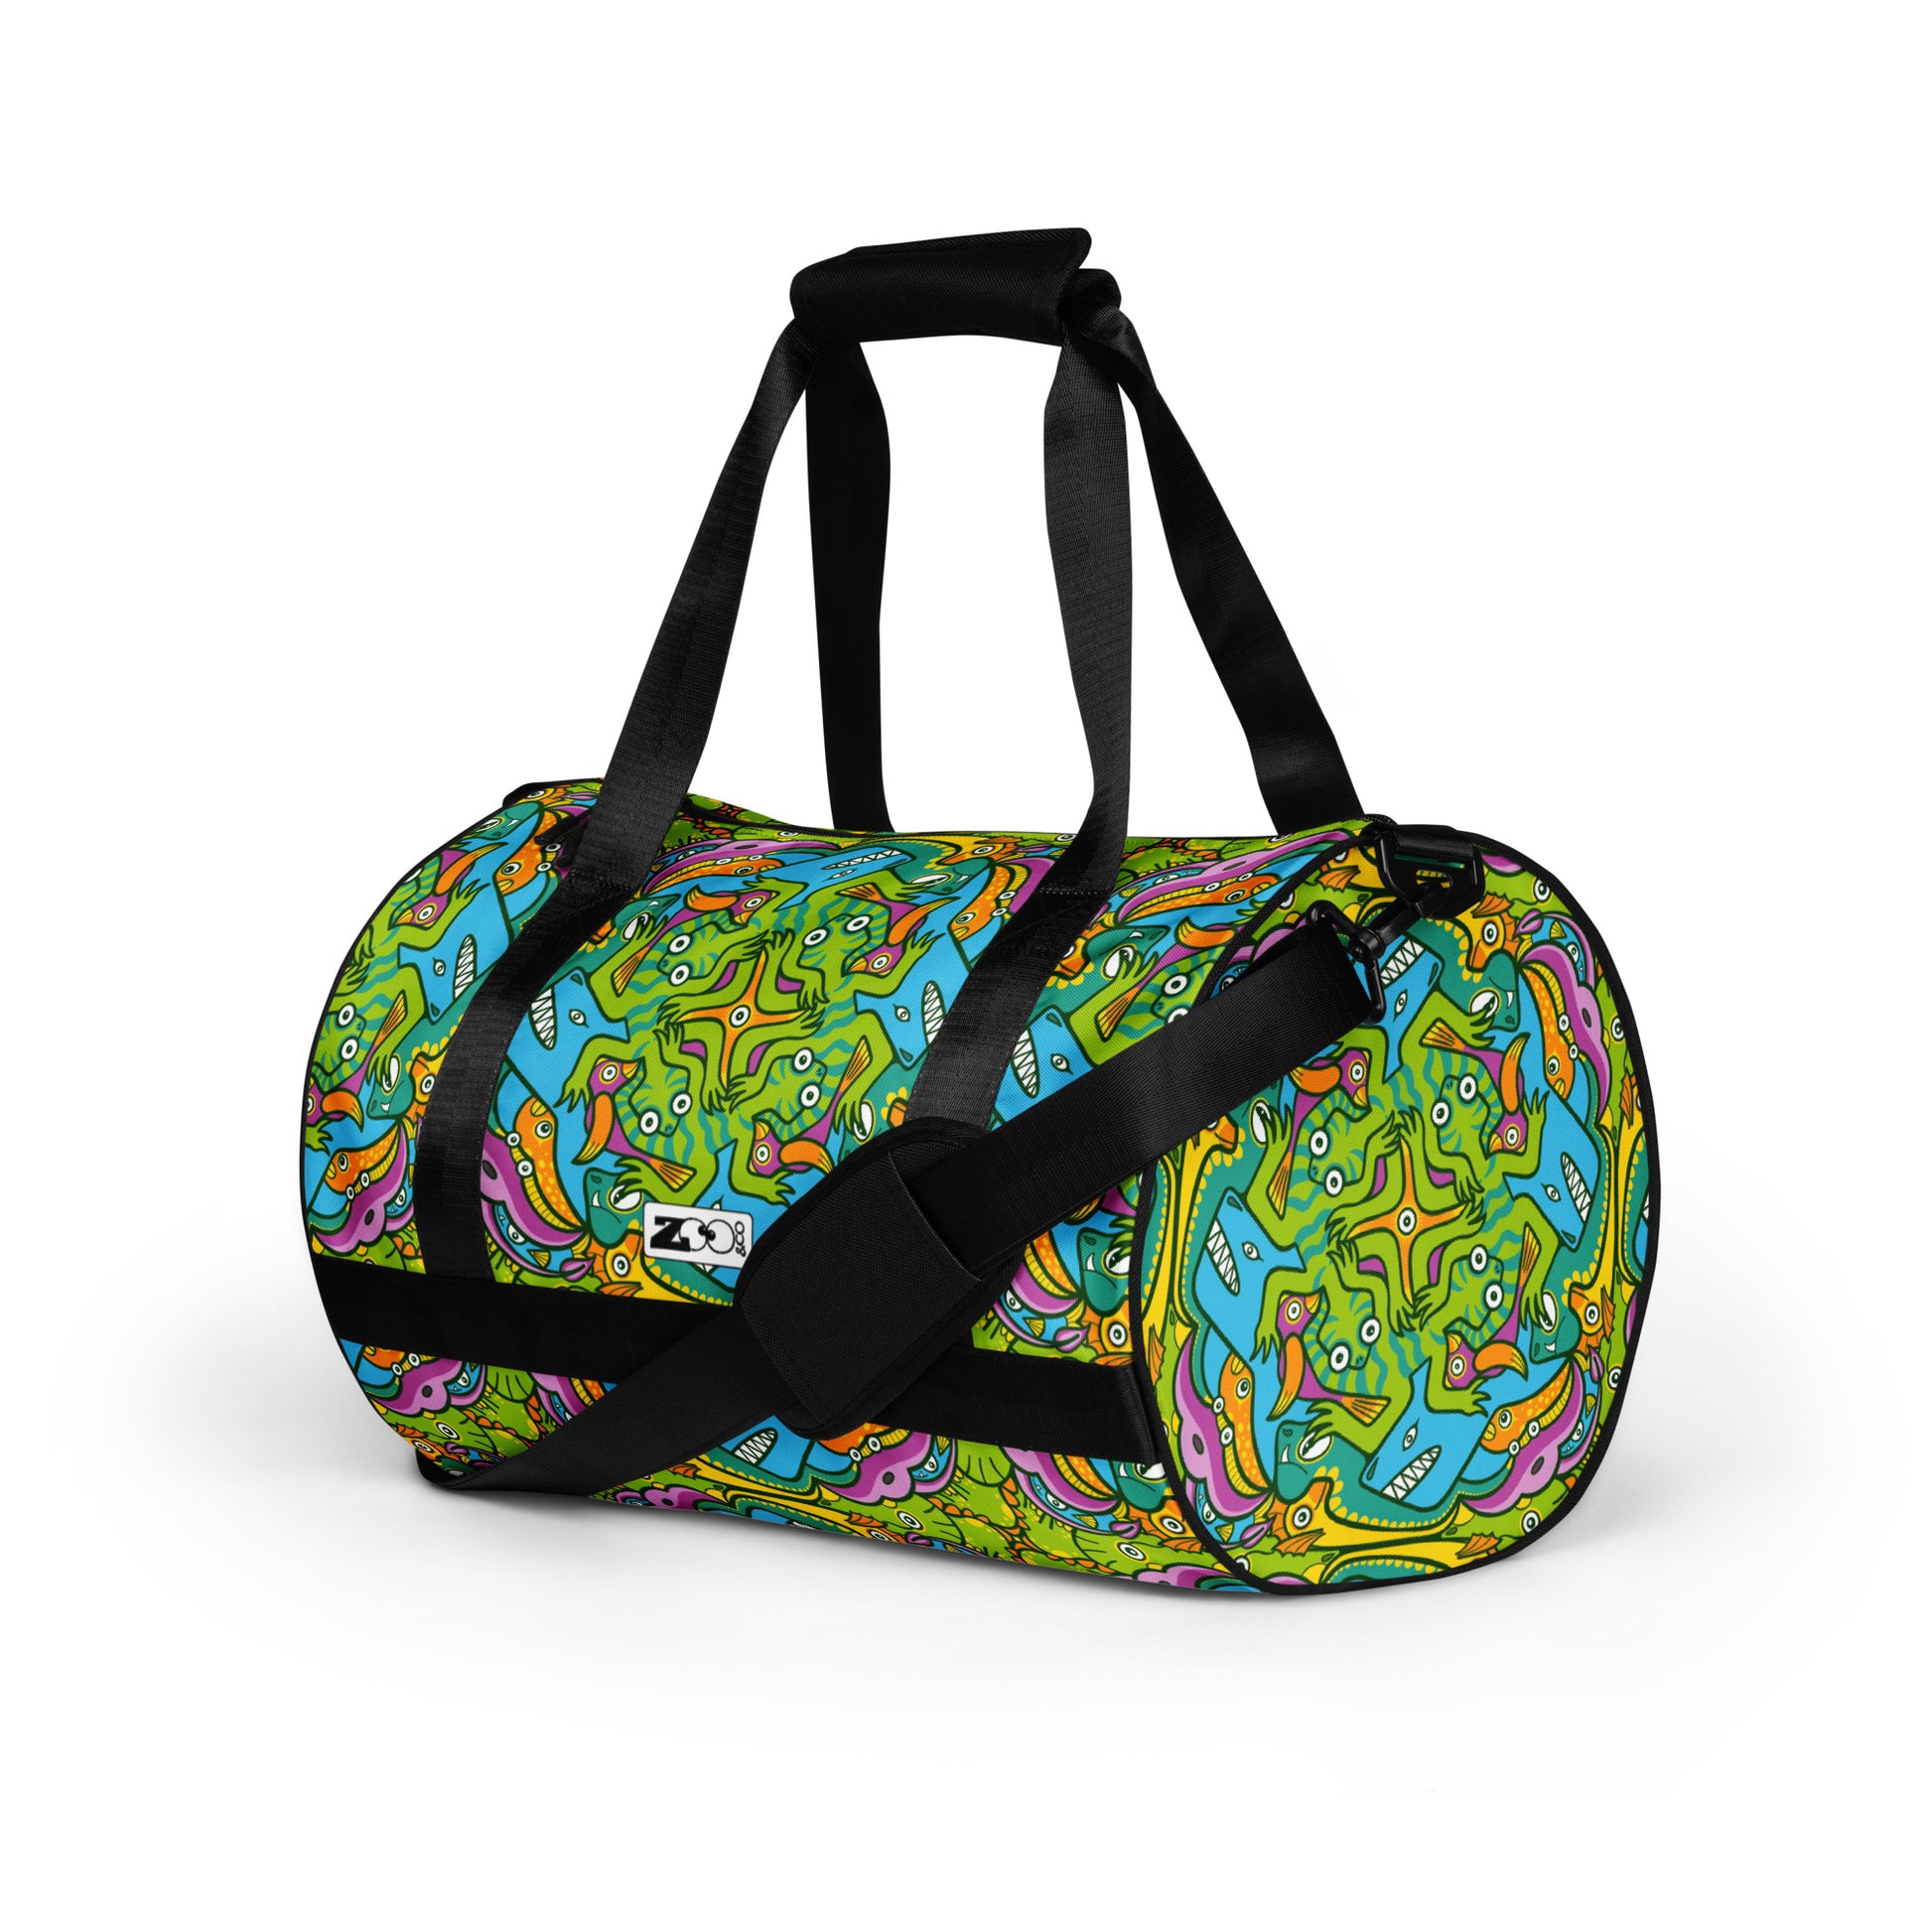 To keep calm and doodle is more than just doodling All-over print gym bag. Overview